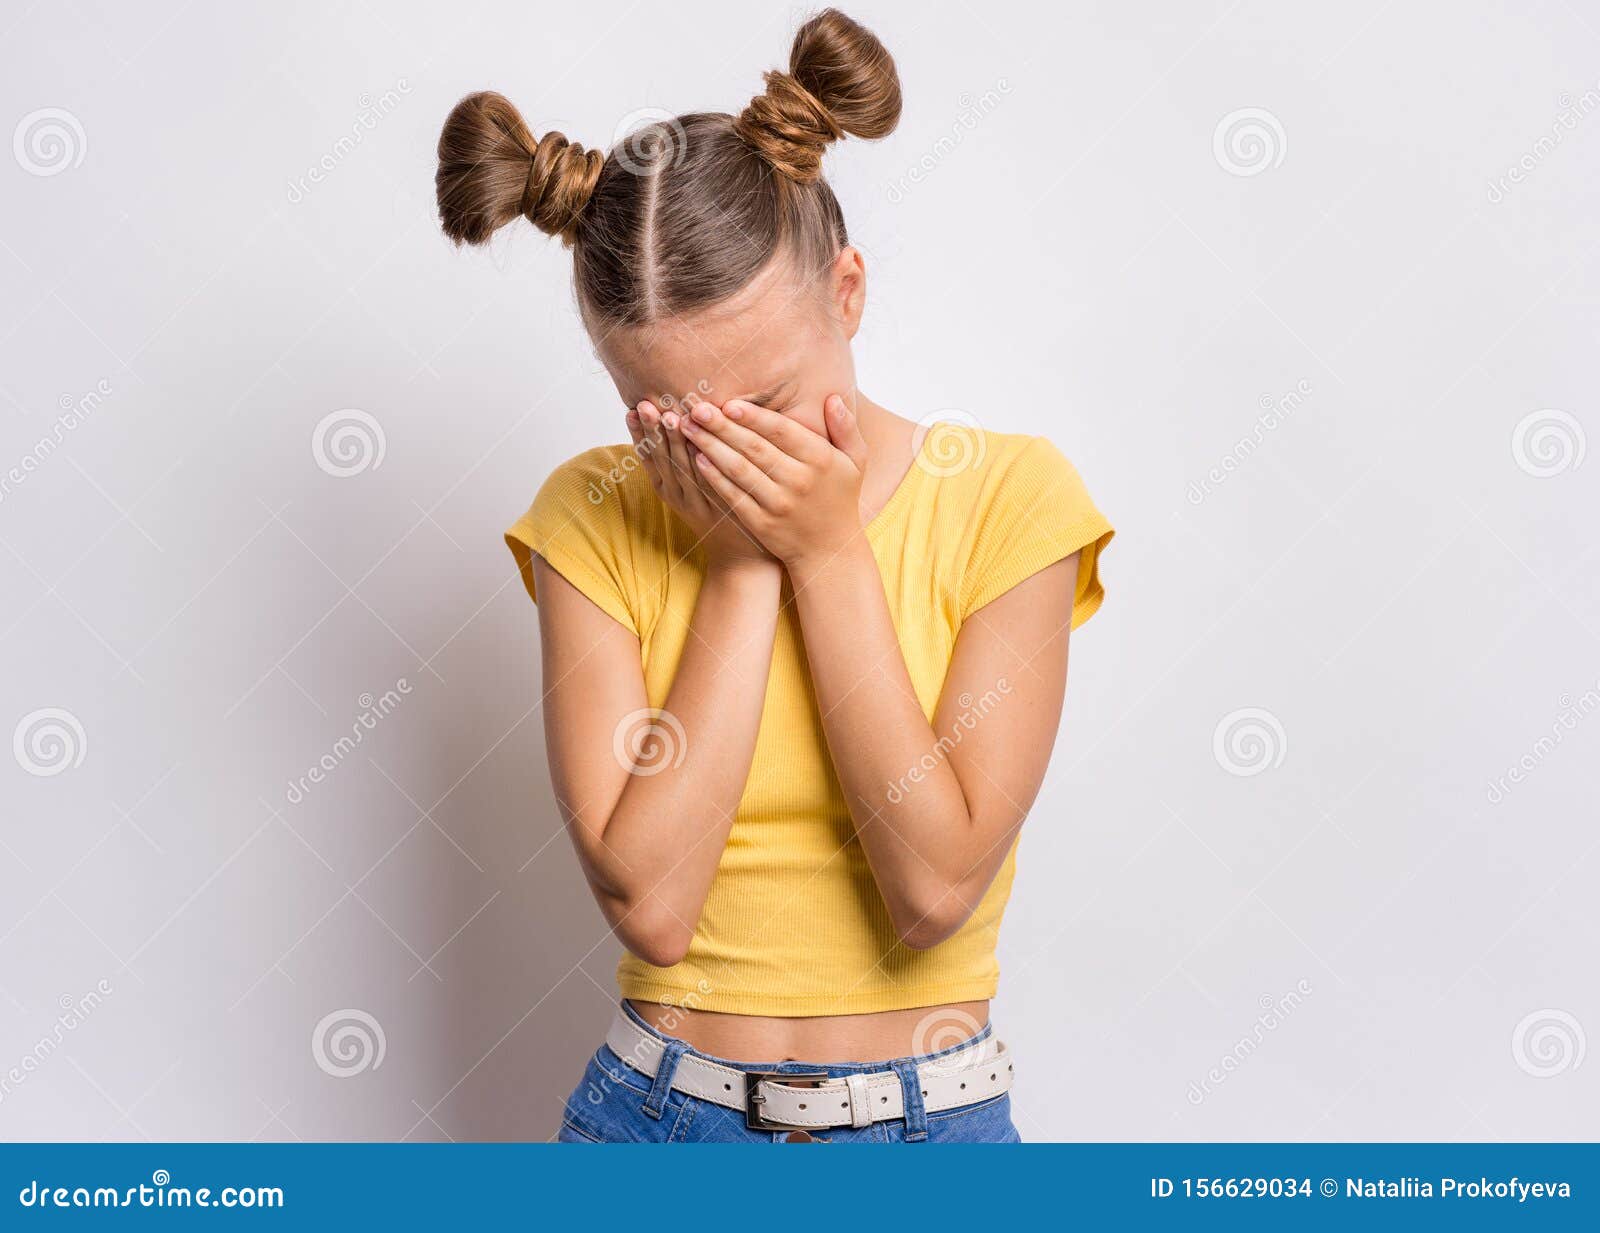 Premium Photo  Child girl sad profile face close up with hands on